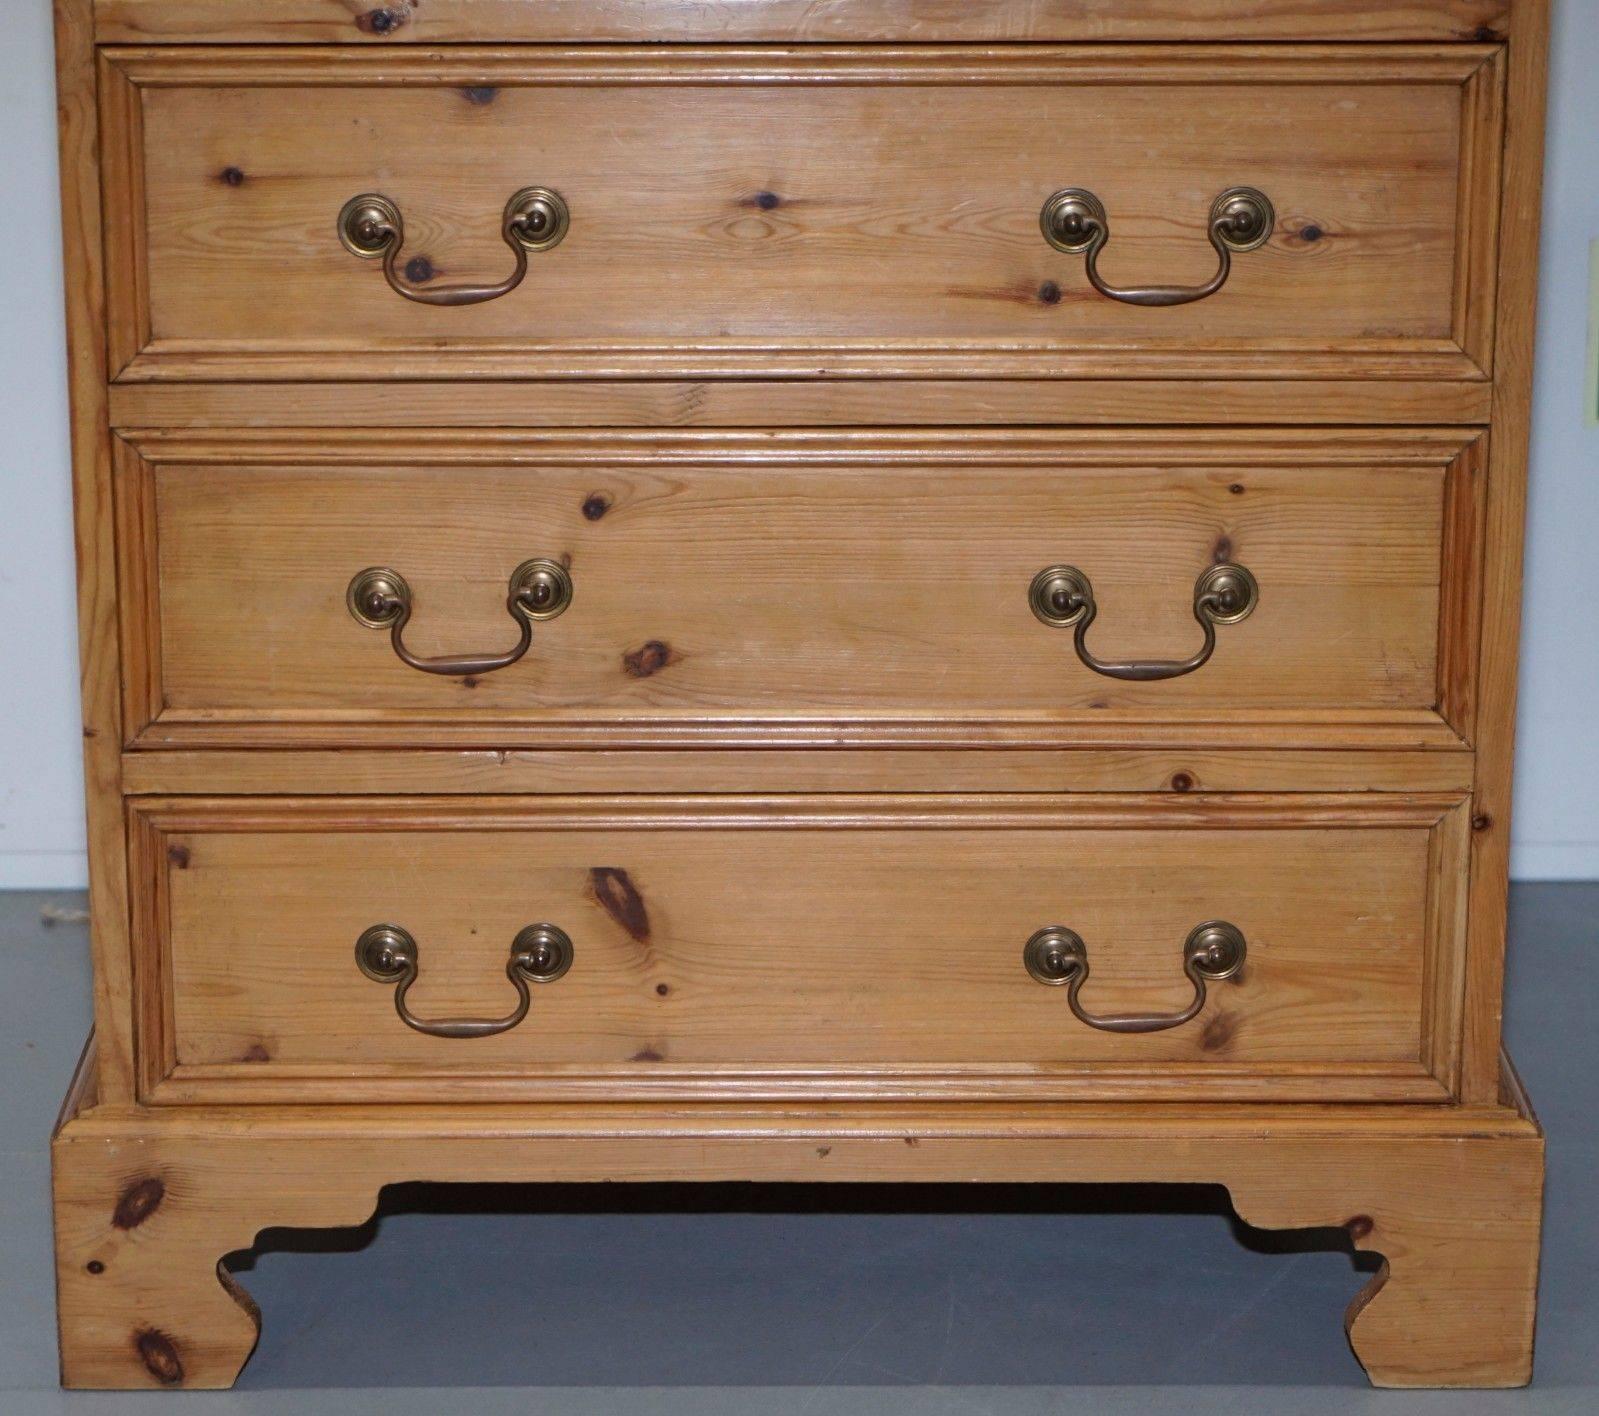 Hand-Carved Vintage Farmhouse Country Large Deep Tallboy Chest of Drawers Swan Neck Handles